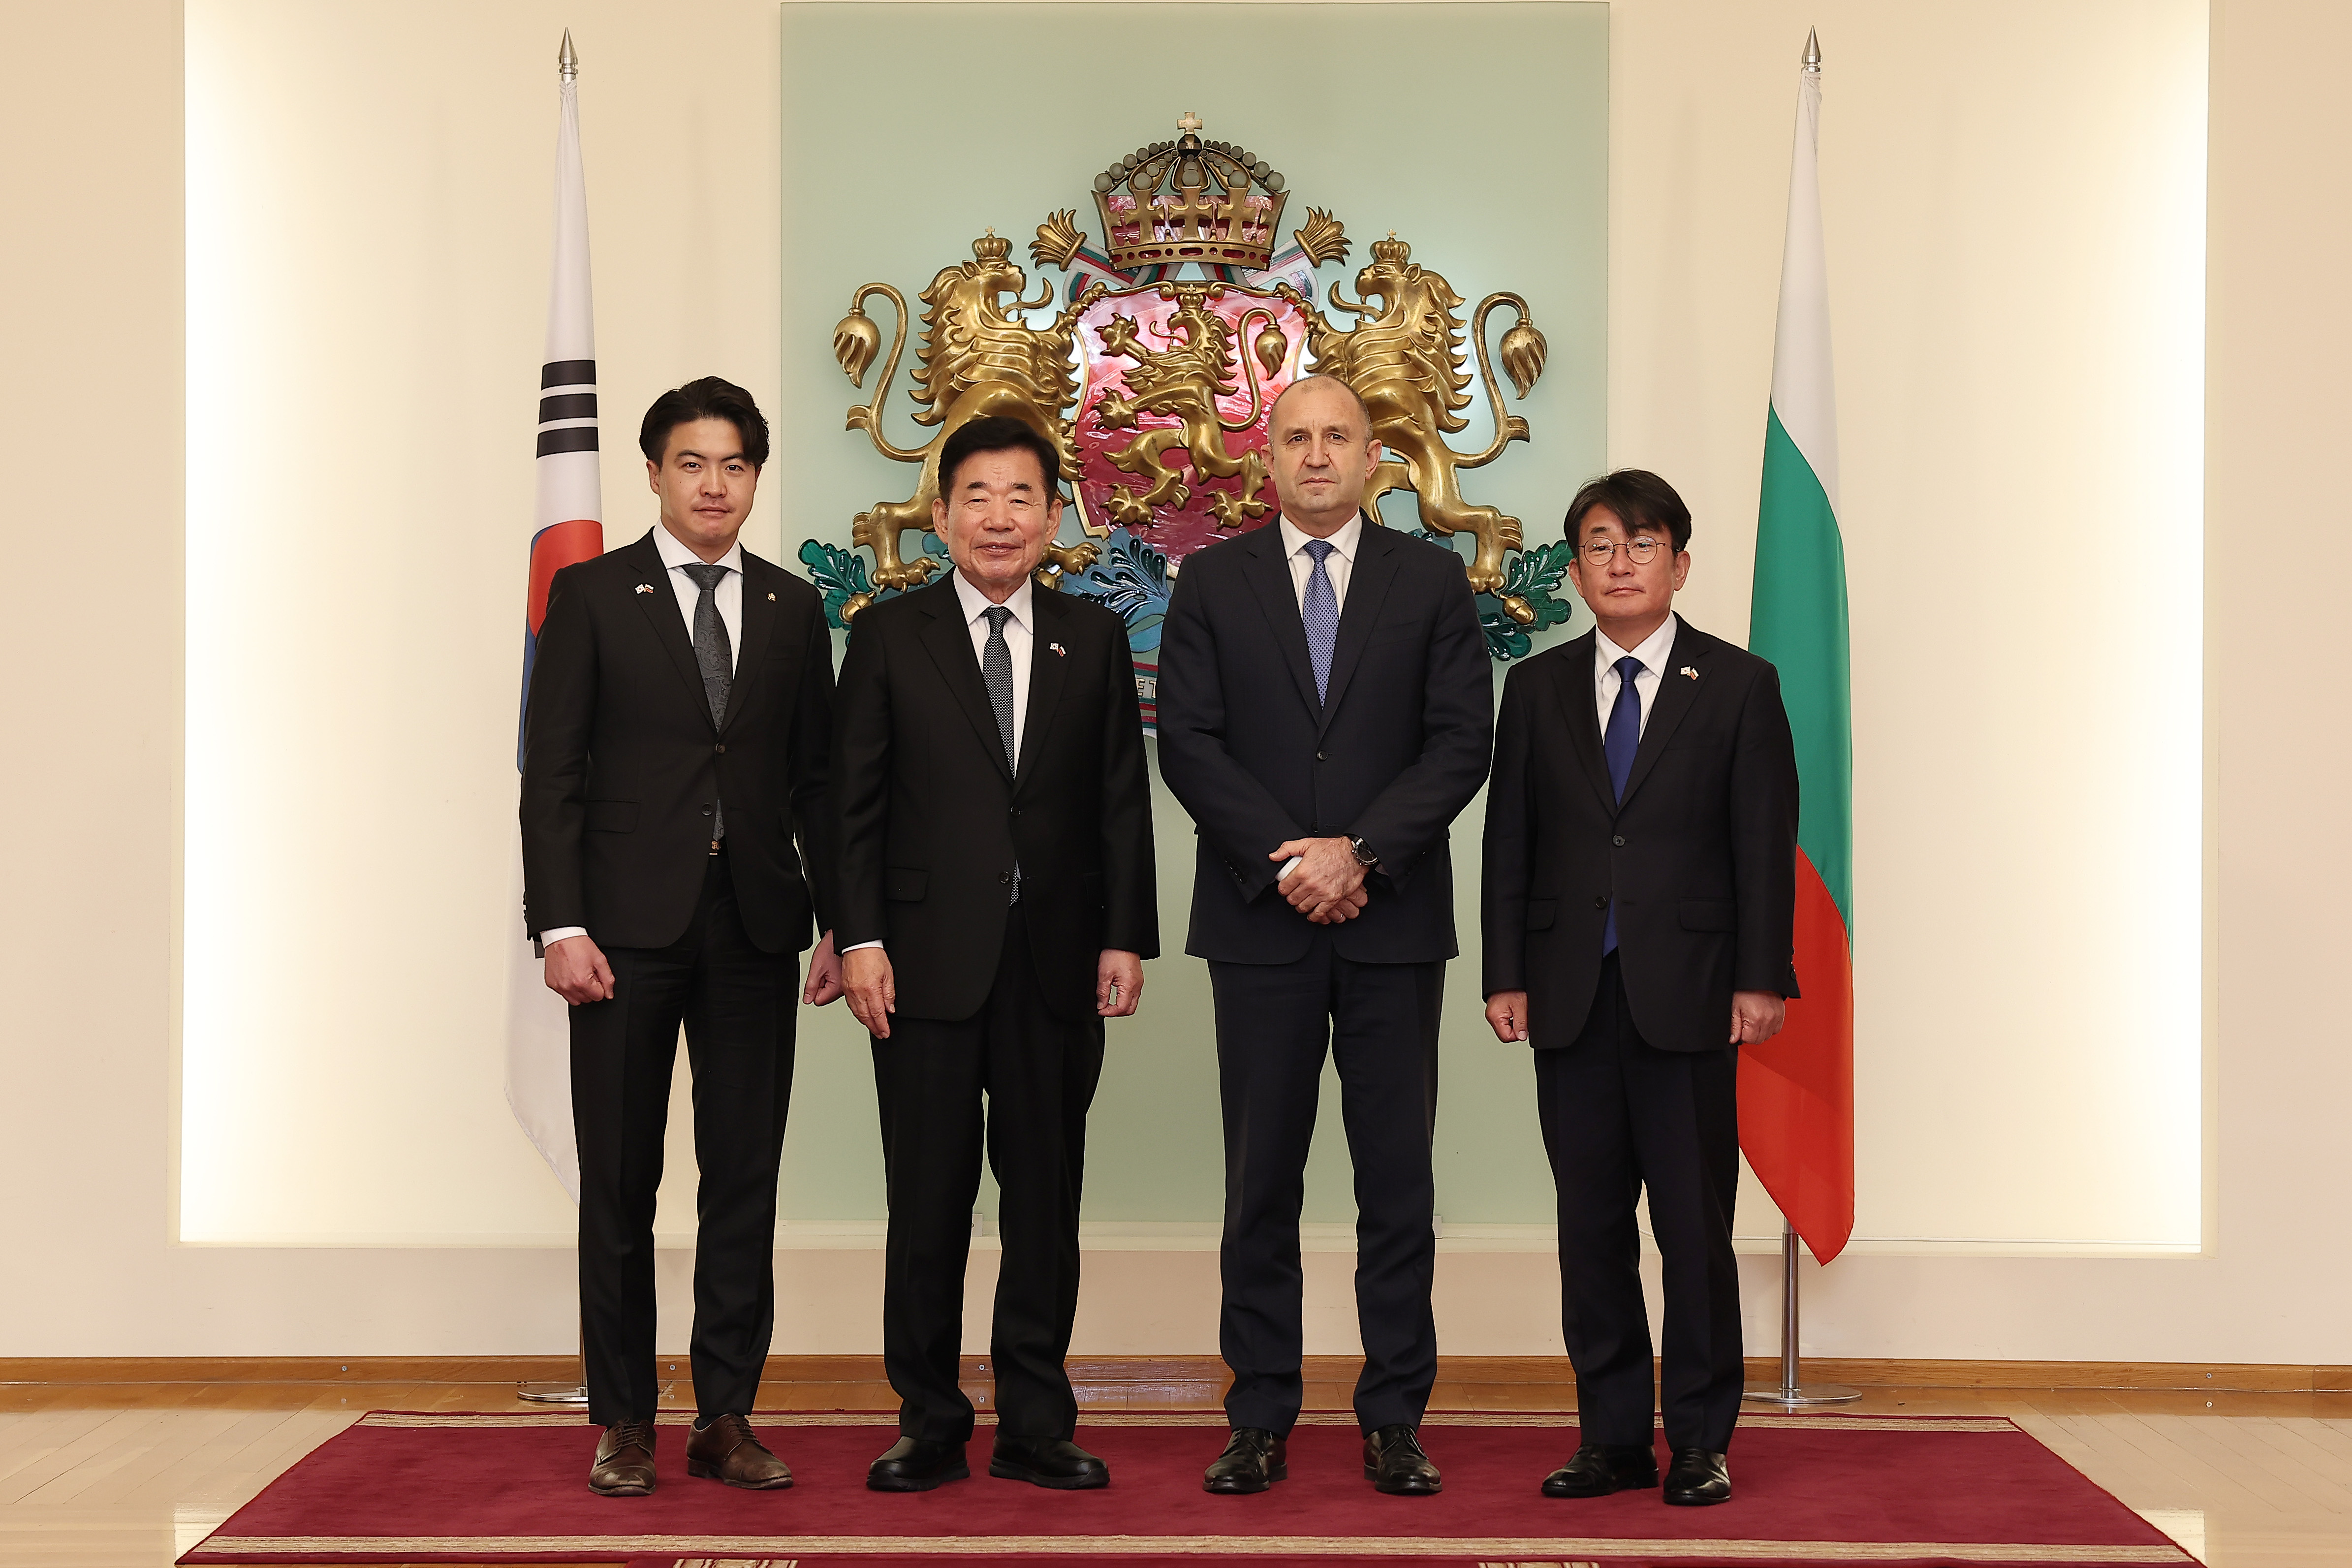 Speaker&rsquo;s economic and sales diplomacy helps Korea win Bulgarian nuclear power plant project 관련사진 4 보기